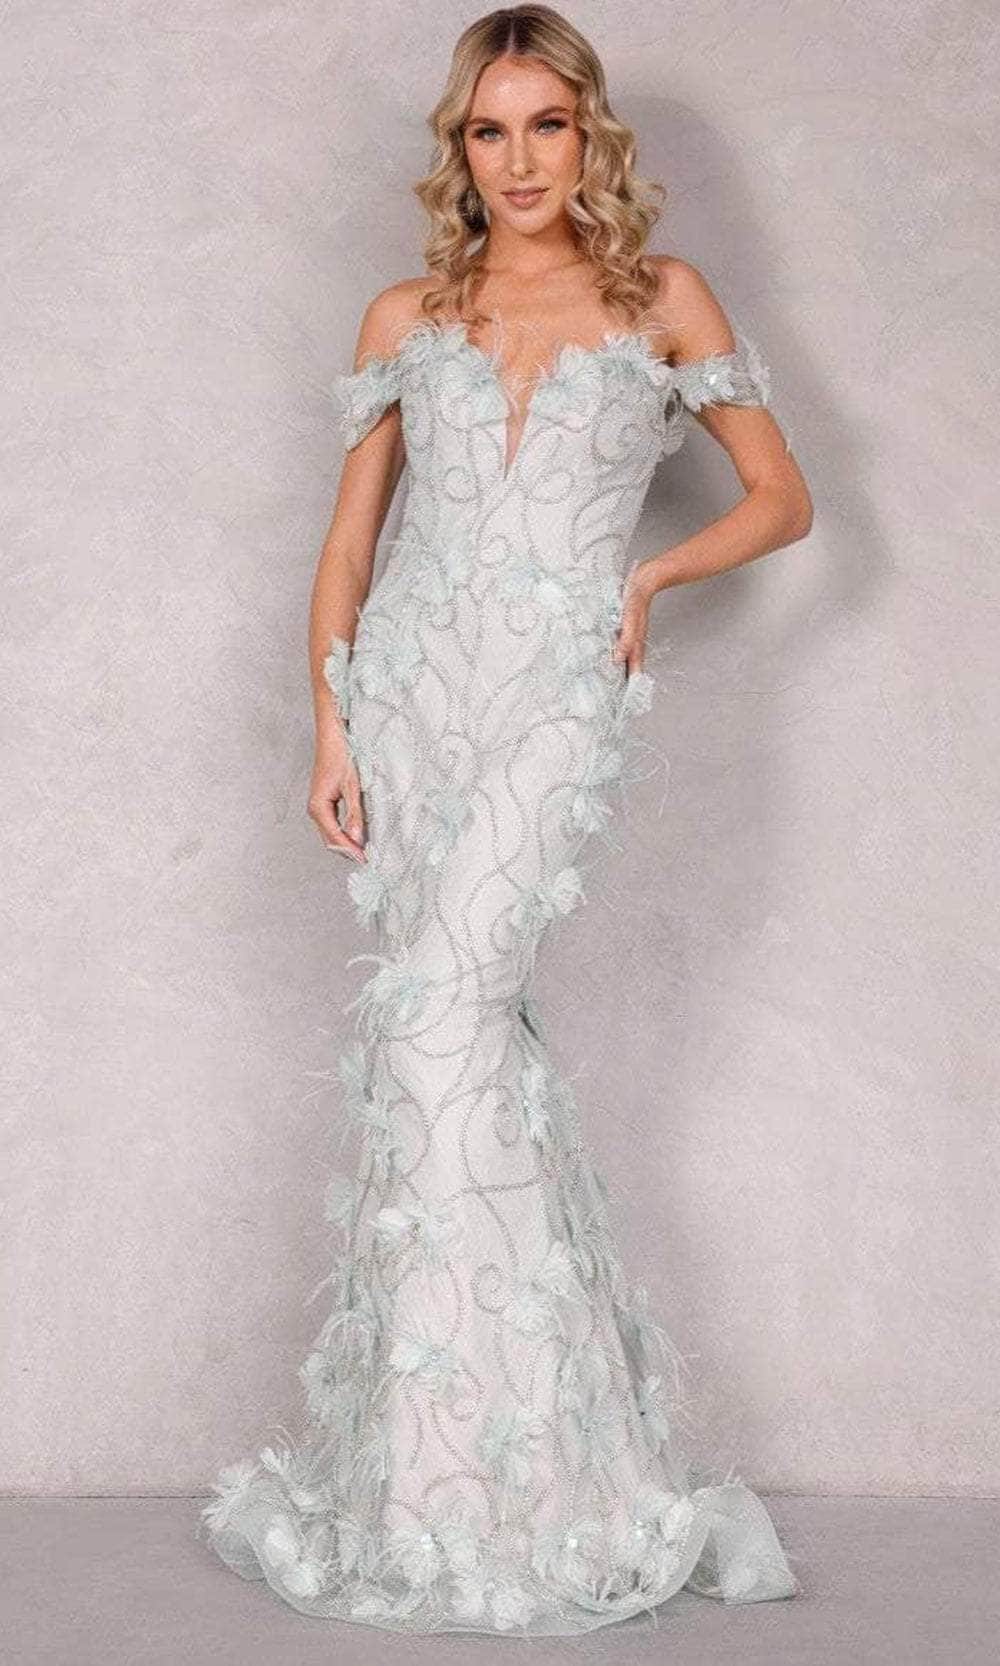 Image of Terani Couture 2027GL3231 - Feather Floral Applique Evening Dress